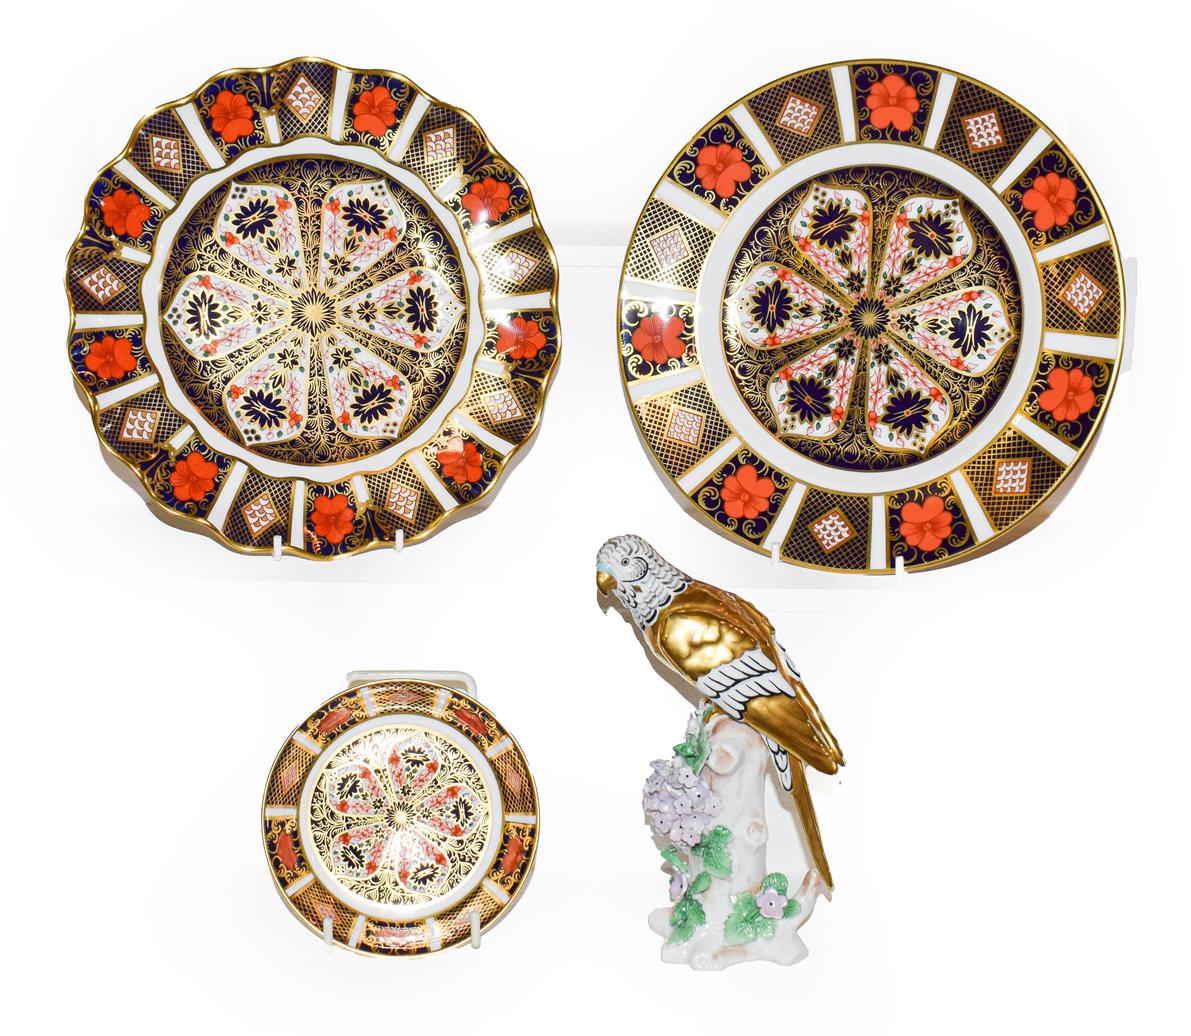 Lot 60 - Two royal Crown Derby plates and a pin dish in the Imari pattern 1128, largest 21.5cm diameter (all